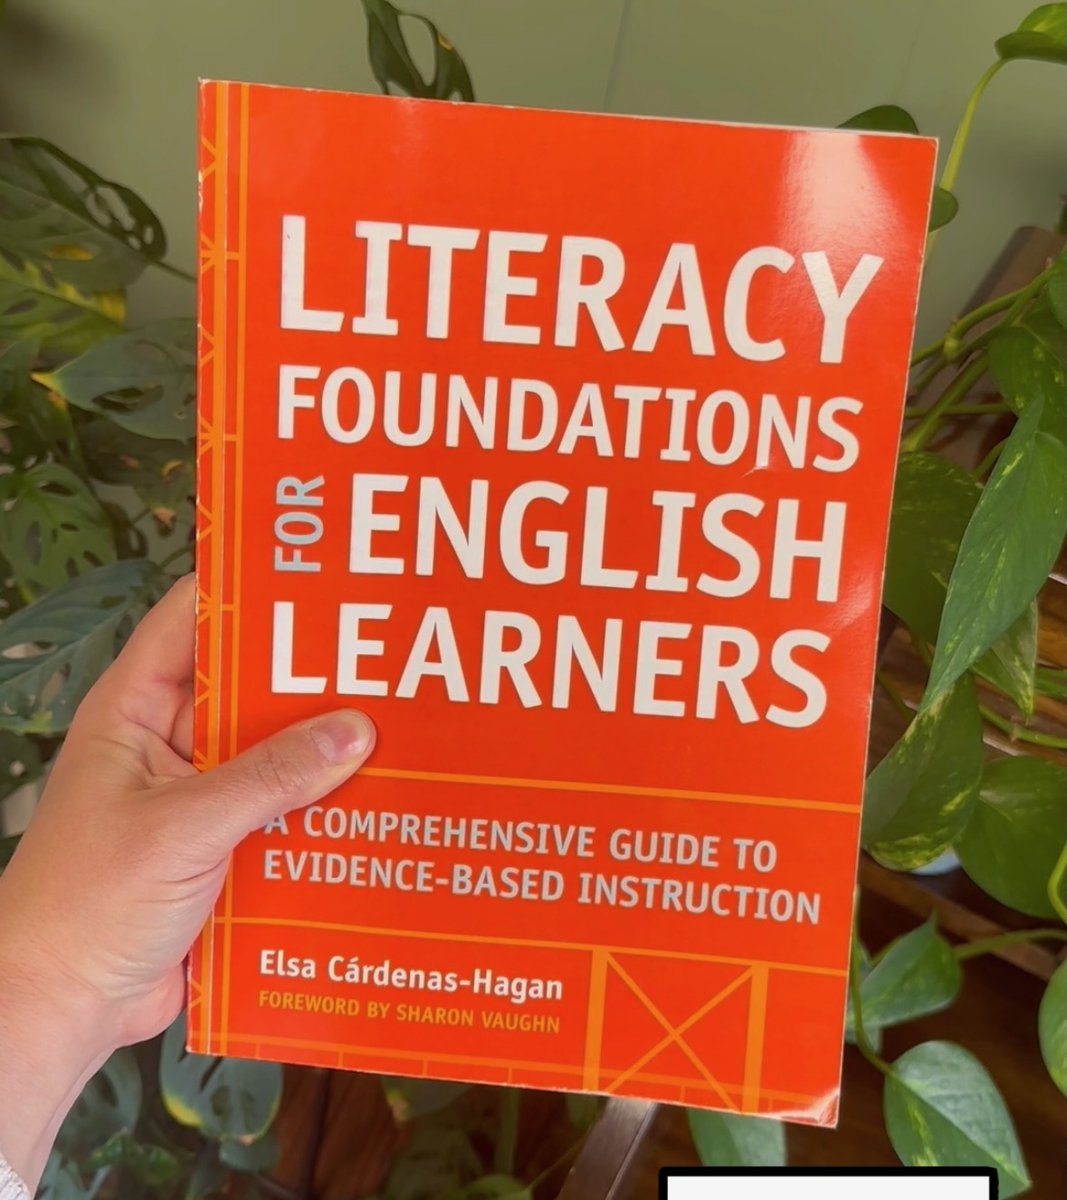 Ever find yourself itching to dive deeper into teaching reading to English language learners? 📚 📚 Grab the book ow.ly/jqLv50Ru223 🎧 AND listen to a rerelease of our podcast episode with Elsa Cardenas Hagan this Friday!